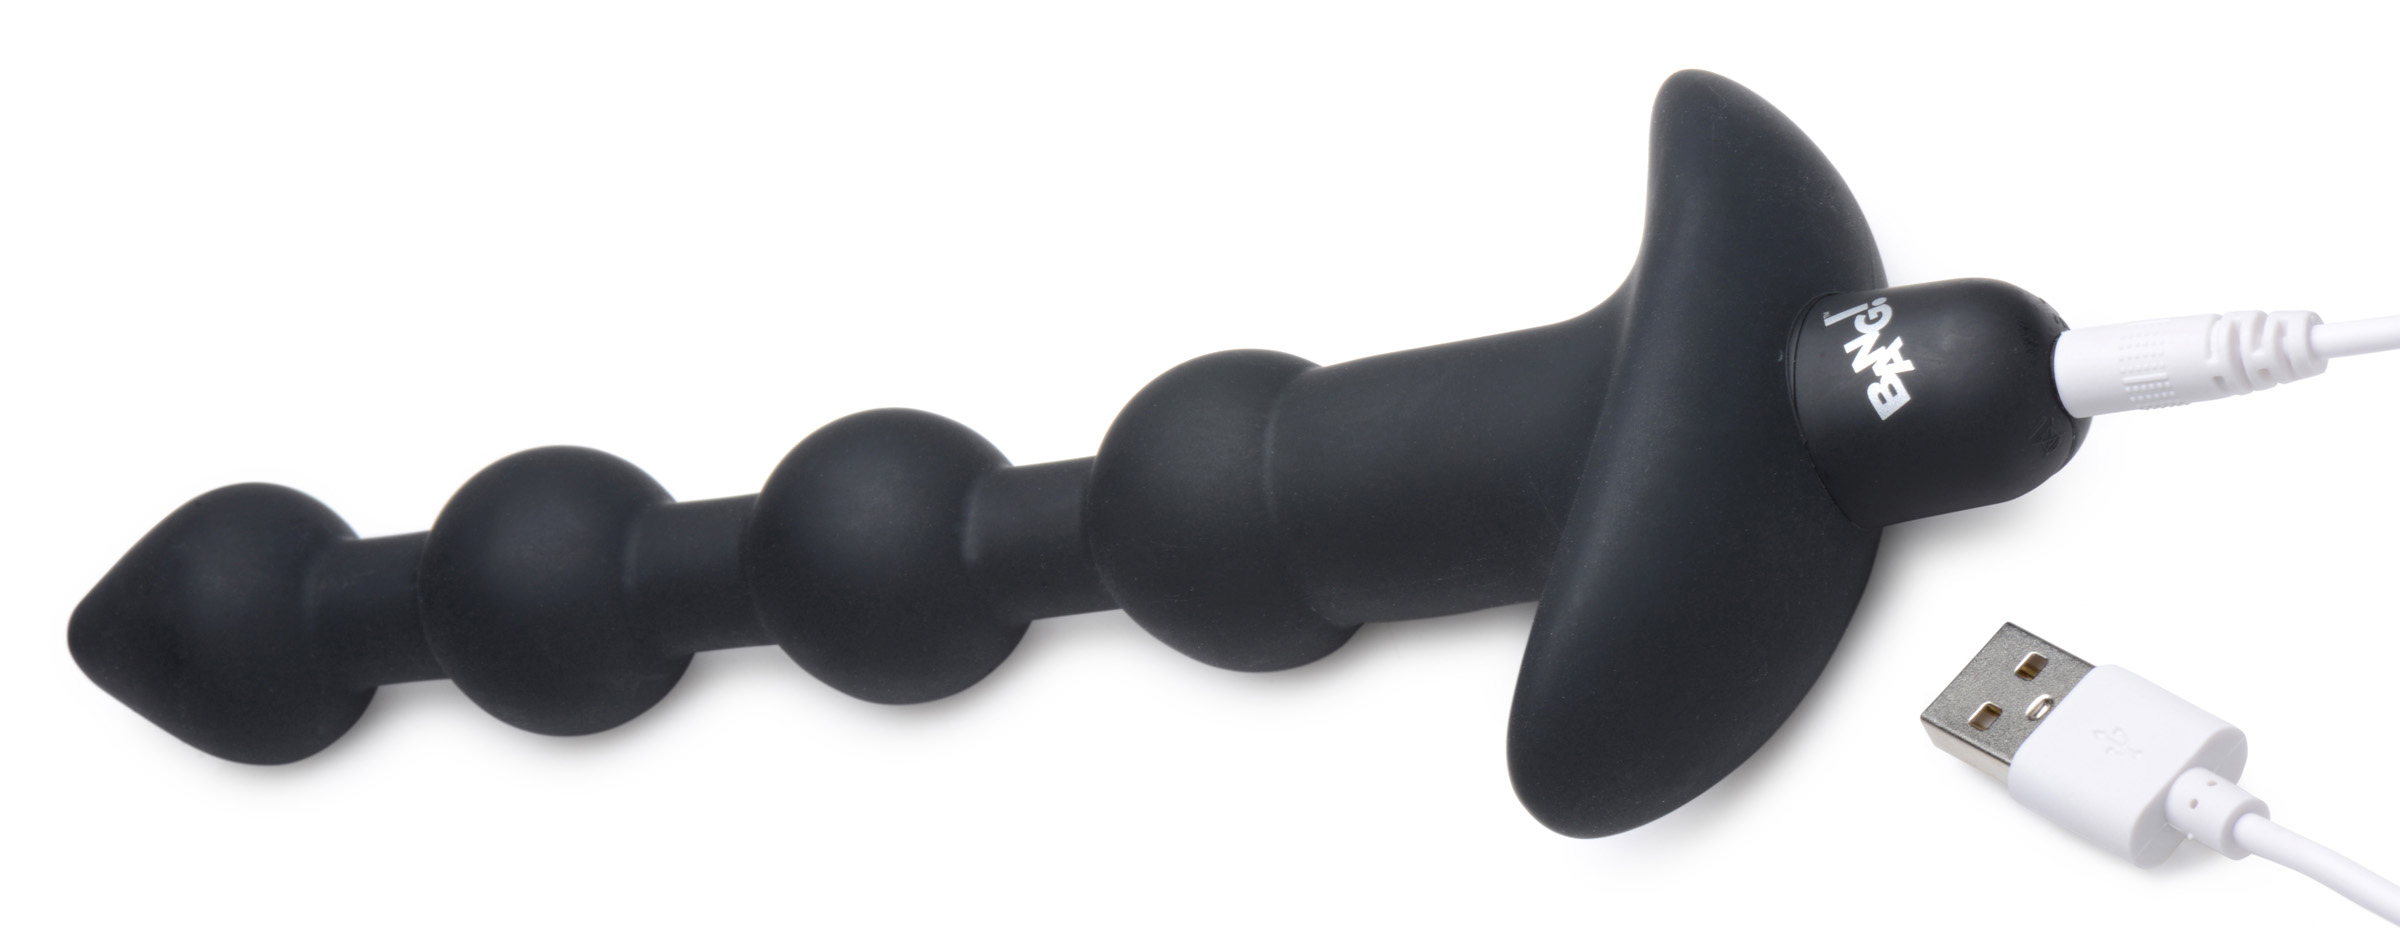 bang vibrating silicone anal beads and remote black 